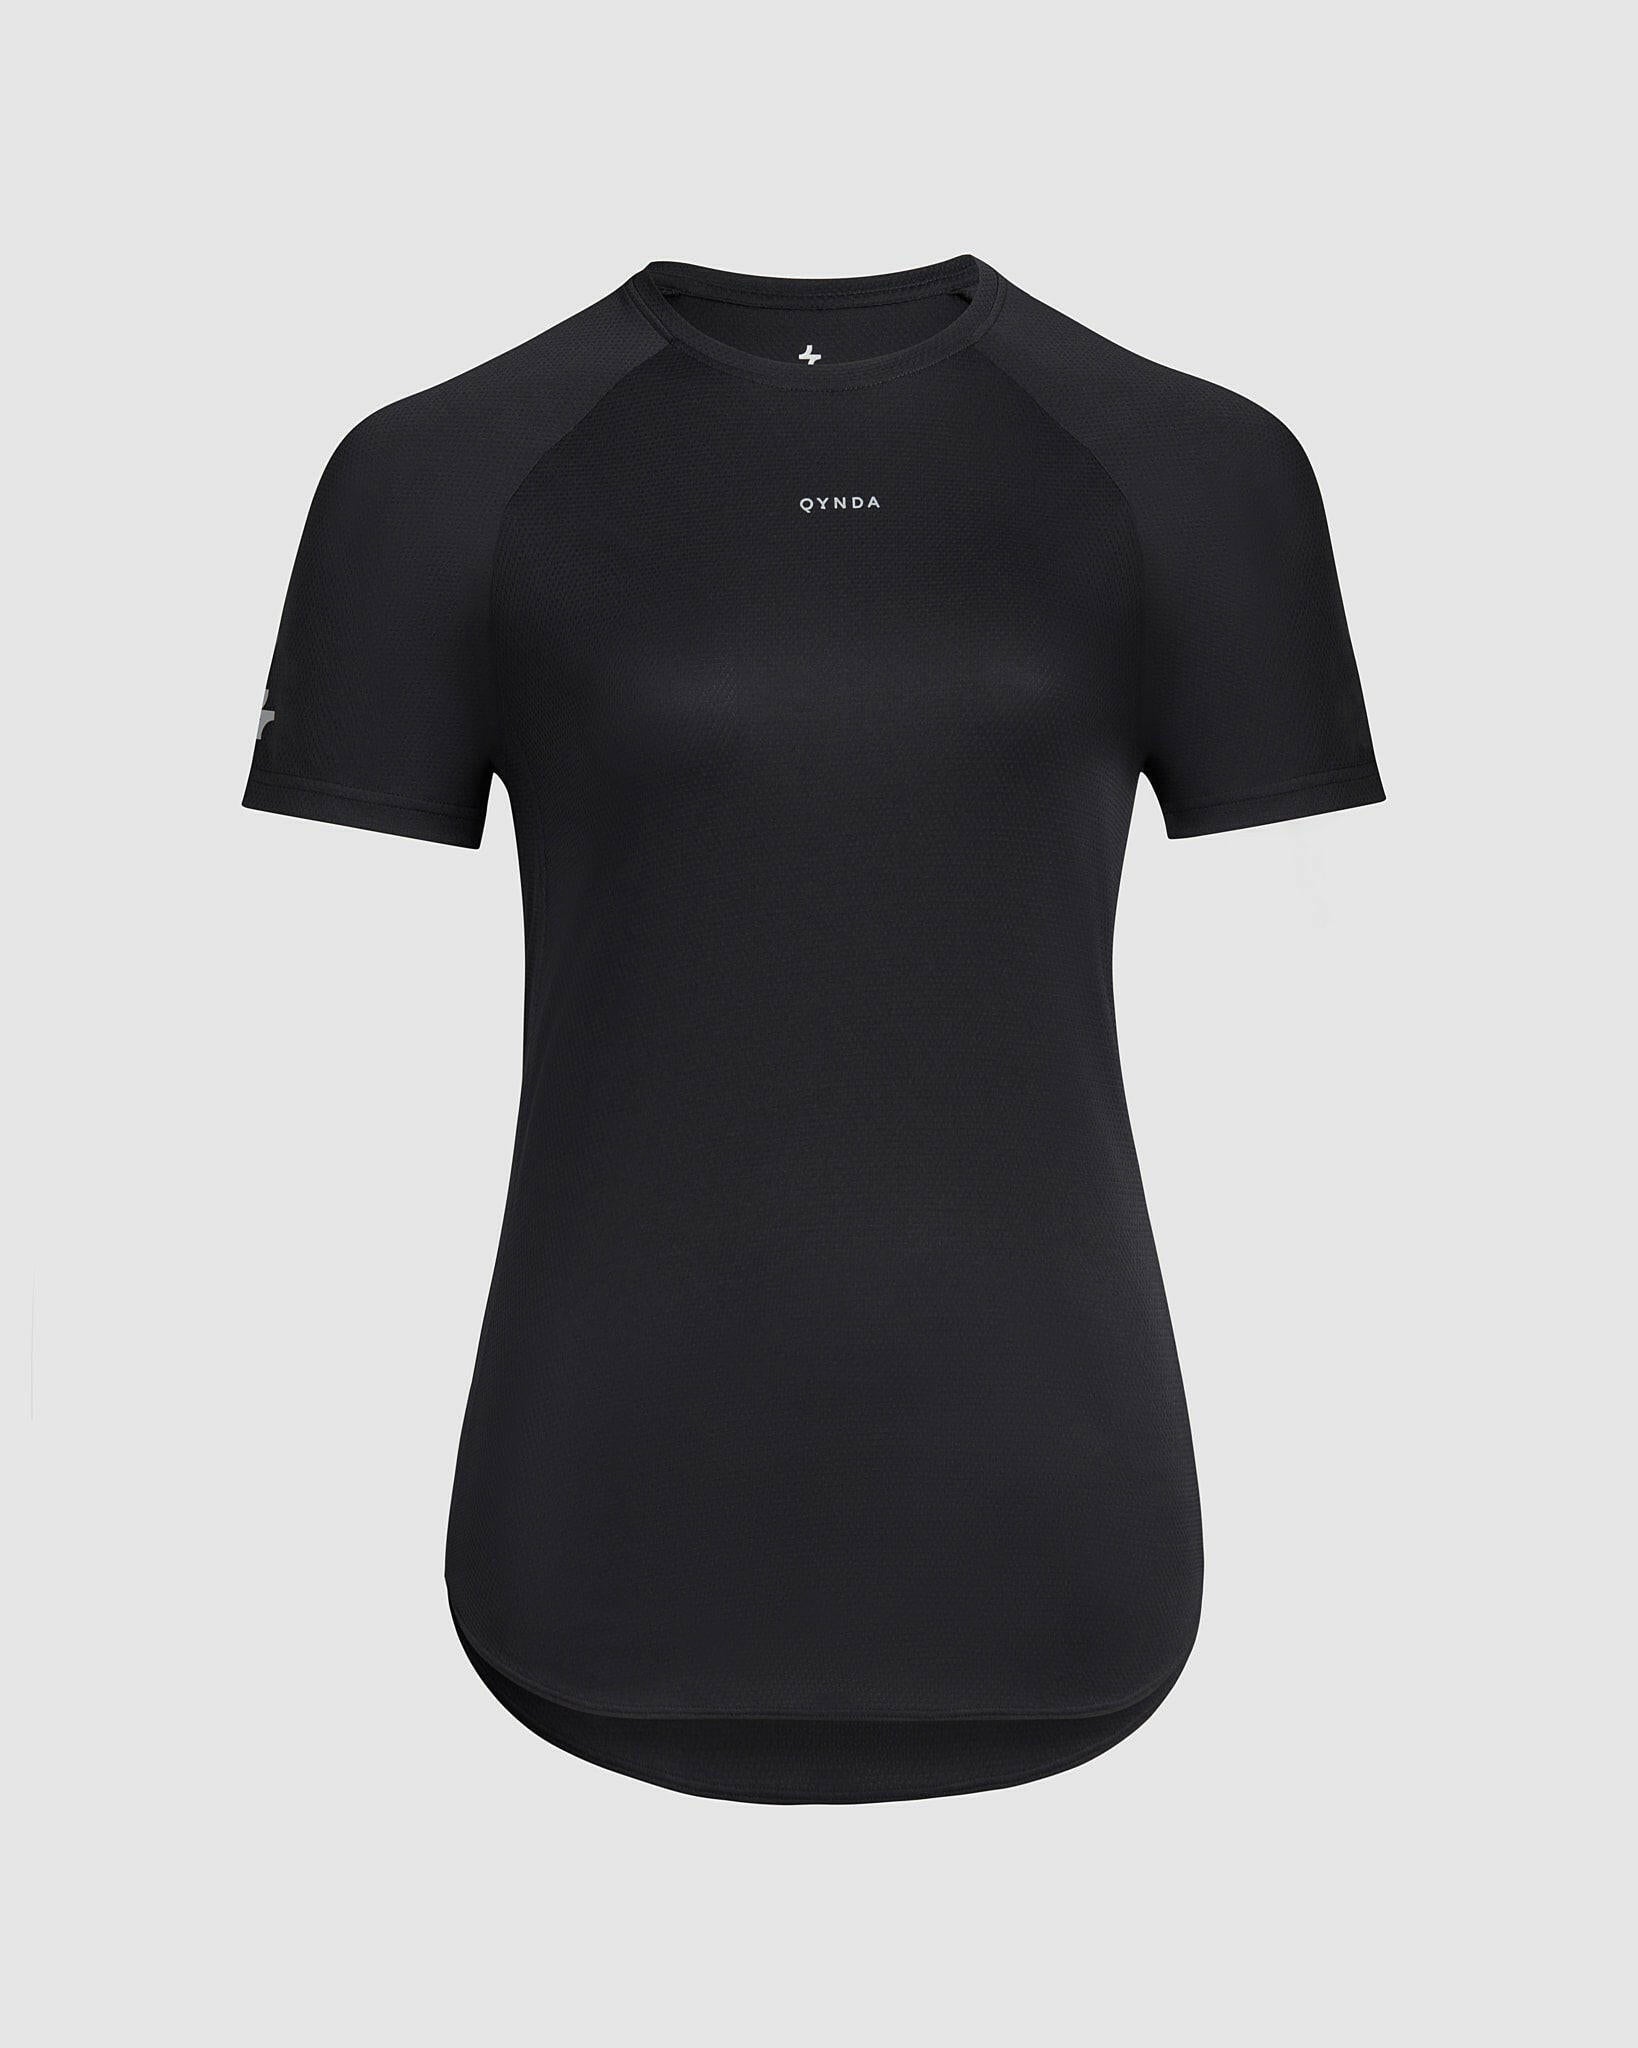 A black, athletic fit, short-sleeved BREATHE T-SHIRT by Qynda designed for breathability, displayed on a plain white background.